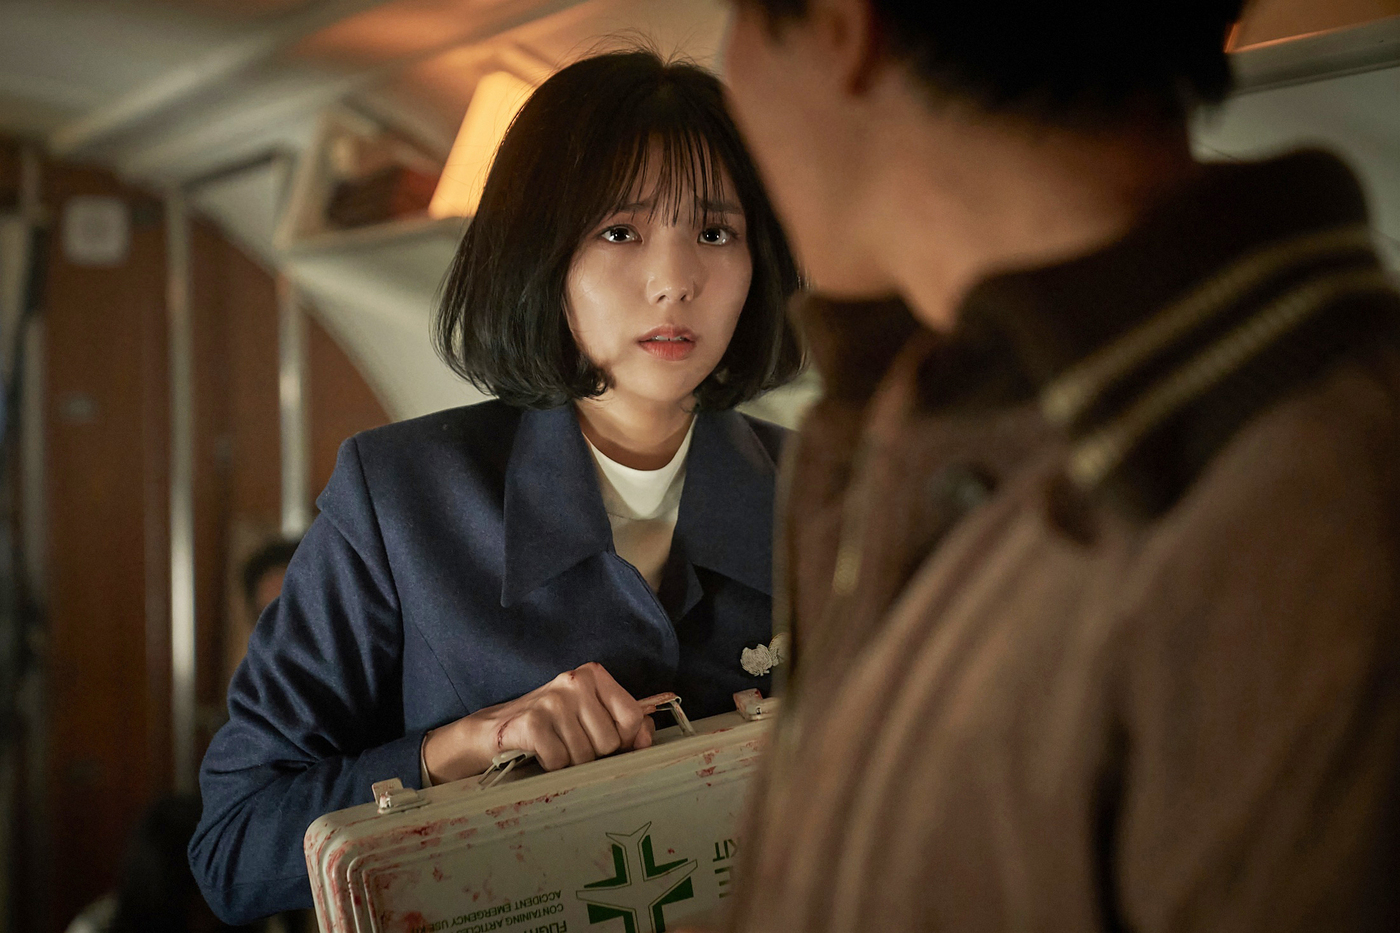 Chae Soo Bin Is A Flight Attendant Who Remains Determined Amidst A Crisis In New Thriller Film